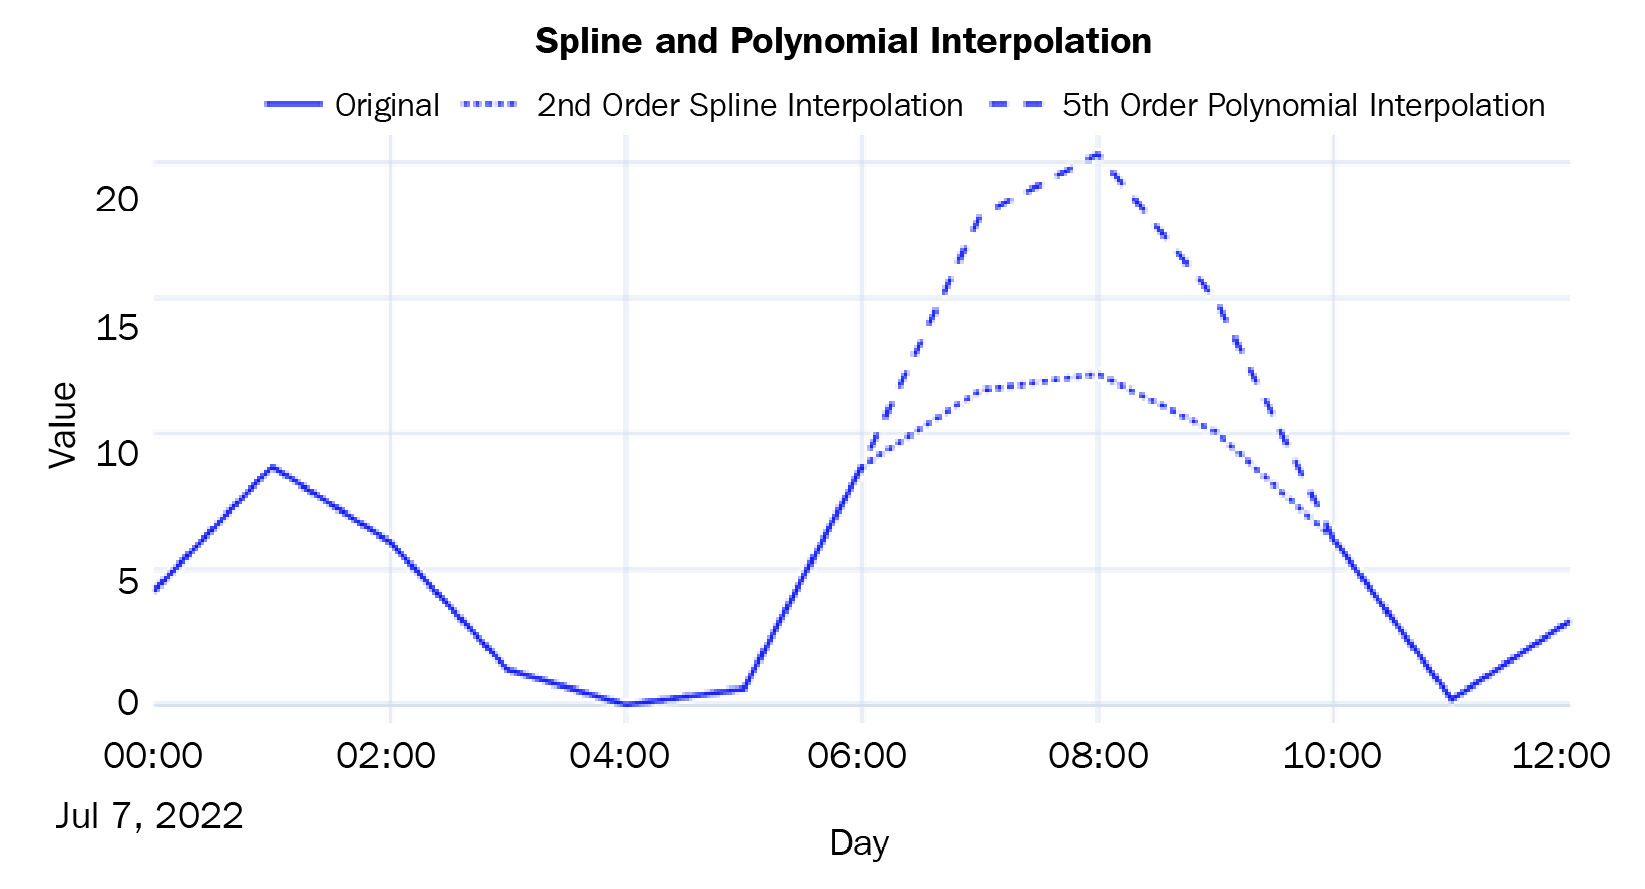 Figure 2.6 – Imputed missing values using spline and polynomial interpolation
